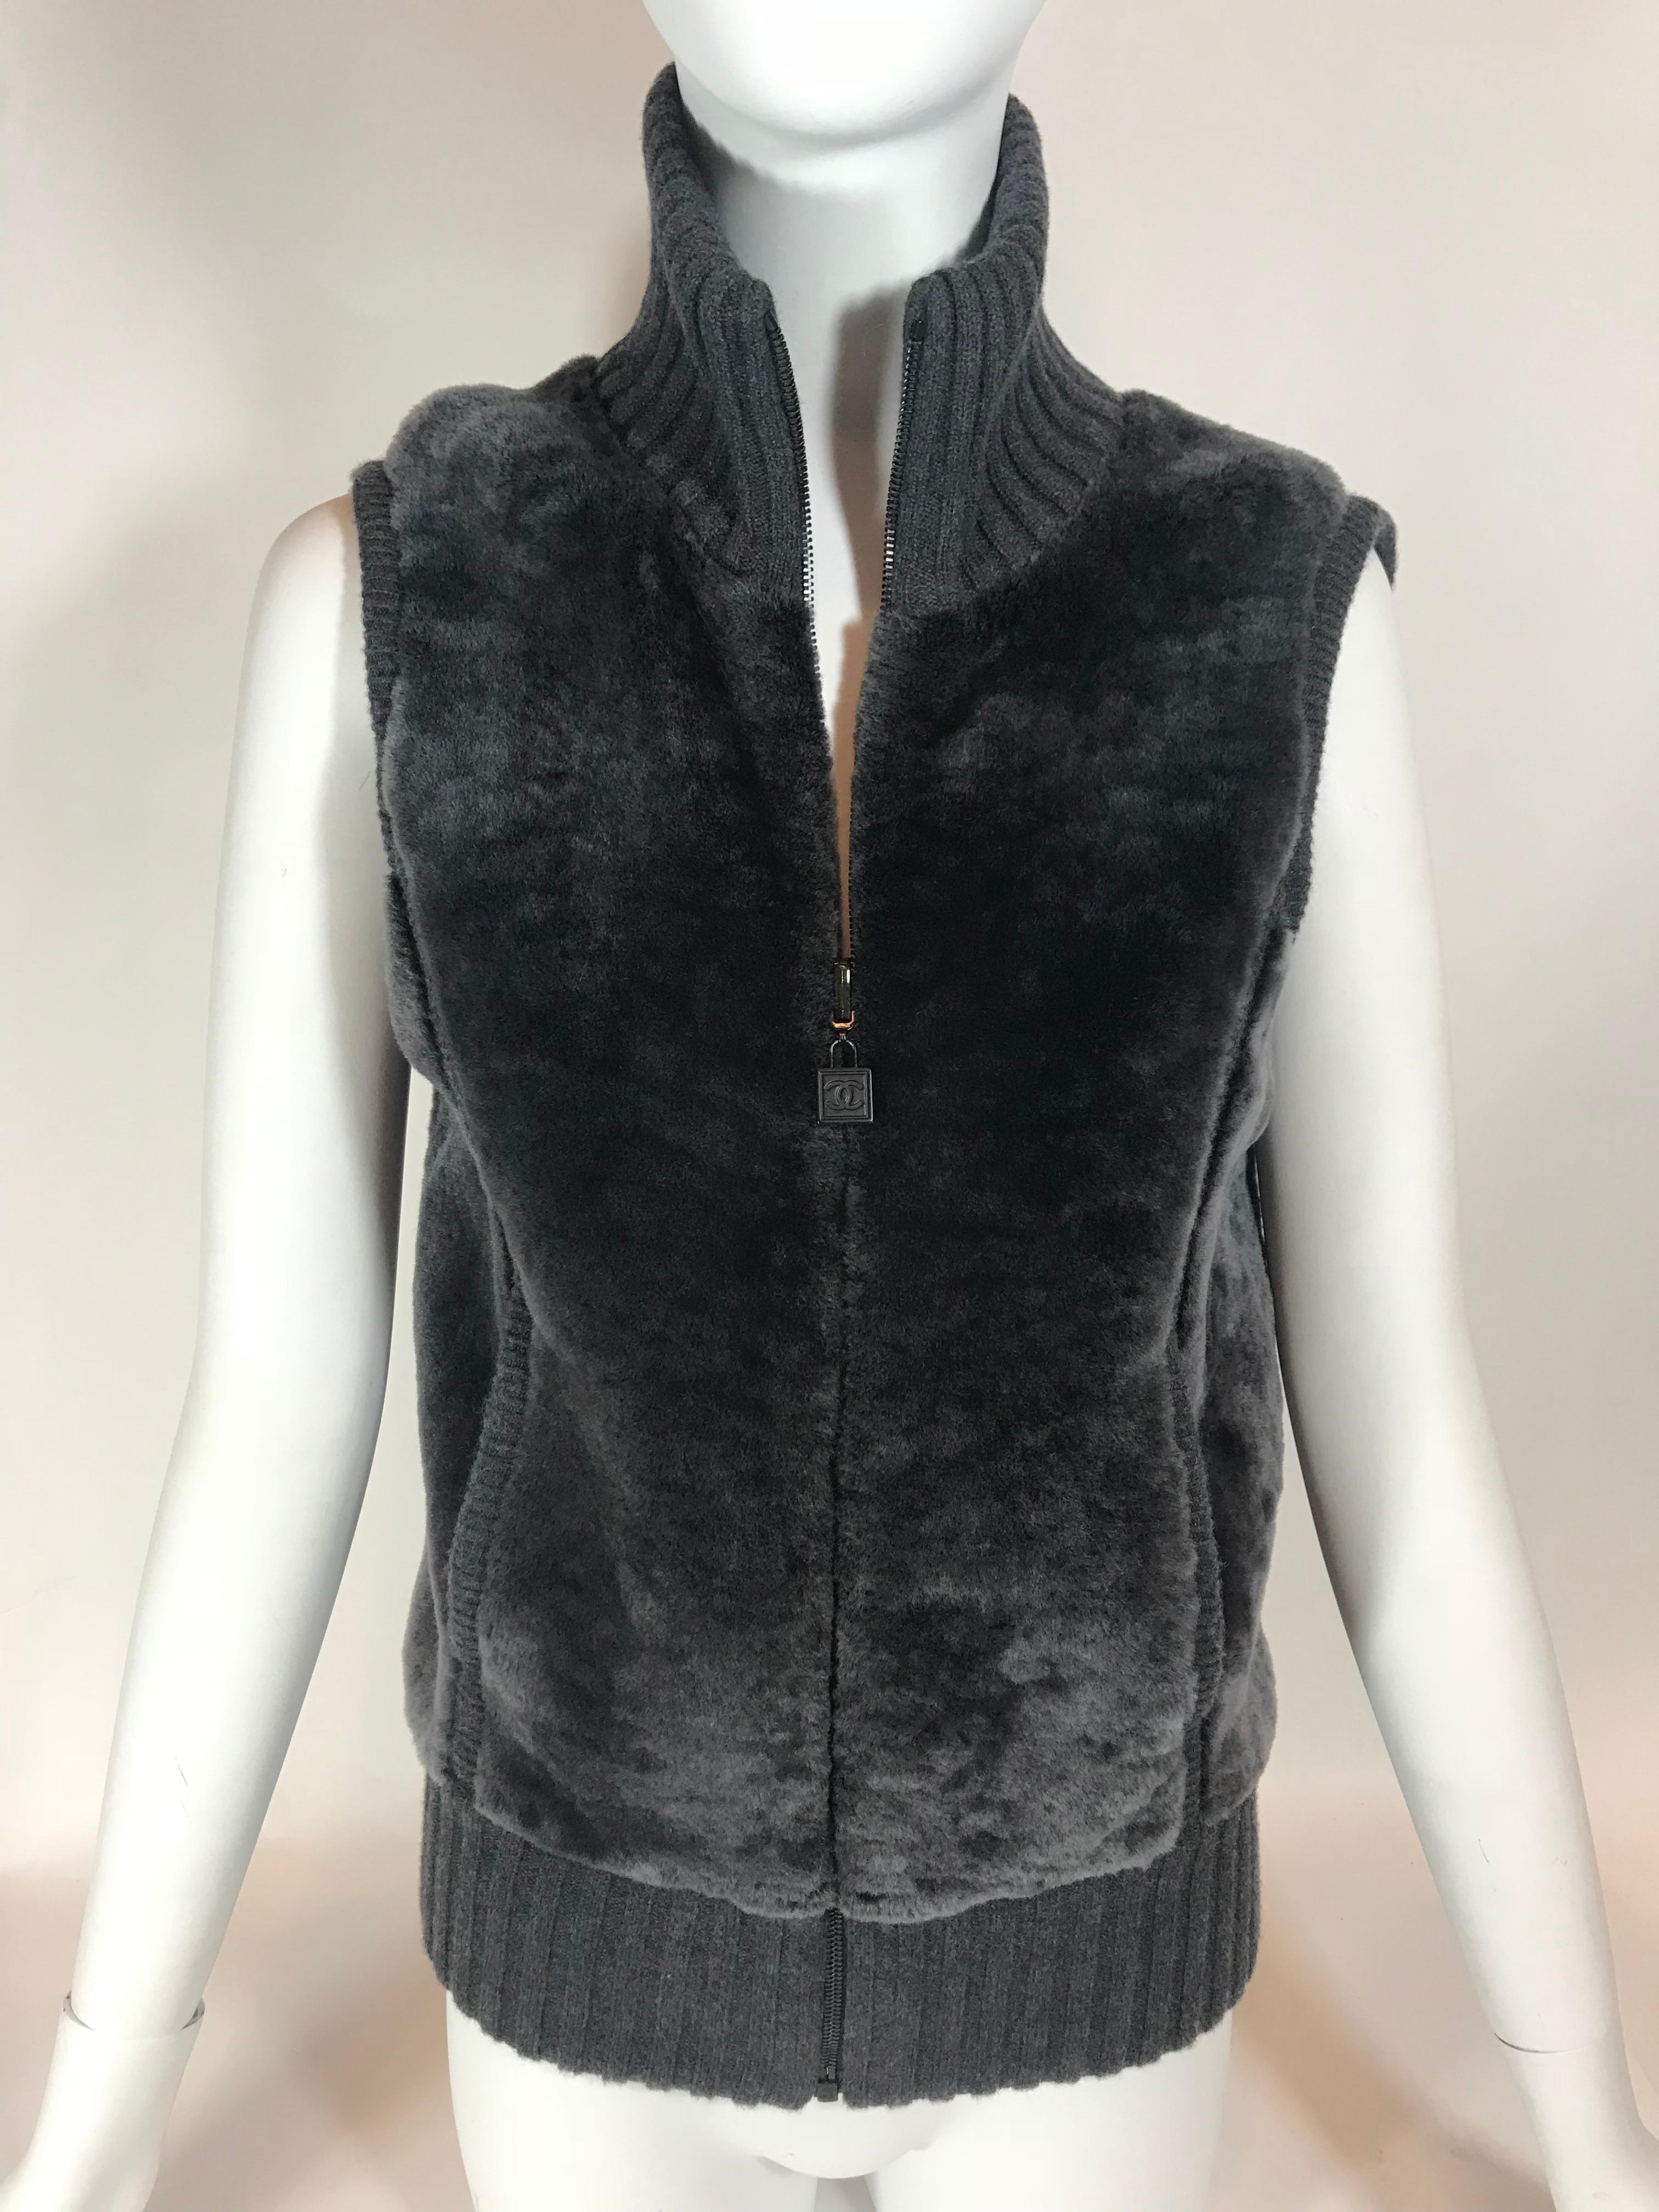 From fall 2009 collection. Gray 100% lambskin. Wool and cashmere blend lining. Dark gun metal hardware. Turtle-neck. Full front zipper up closure. Ribbed design.